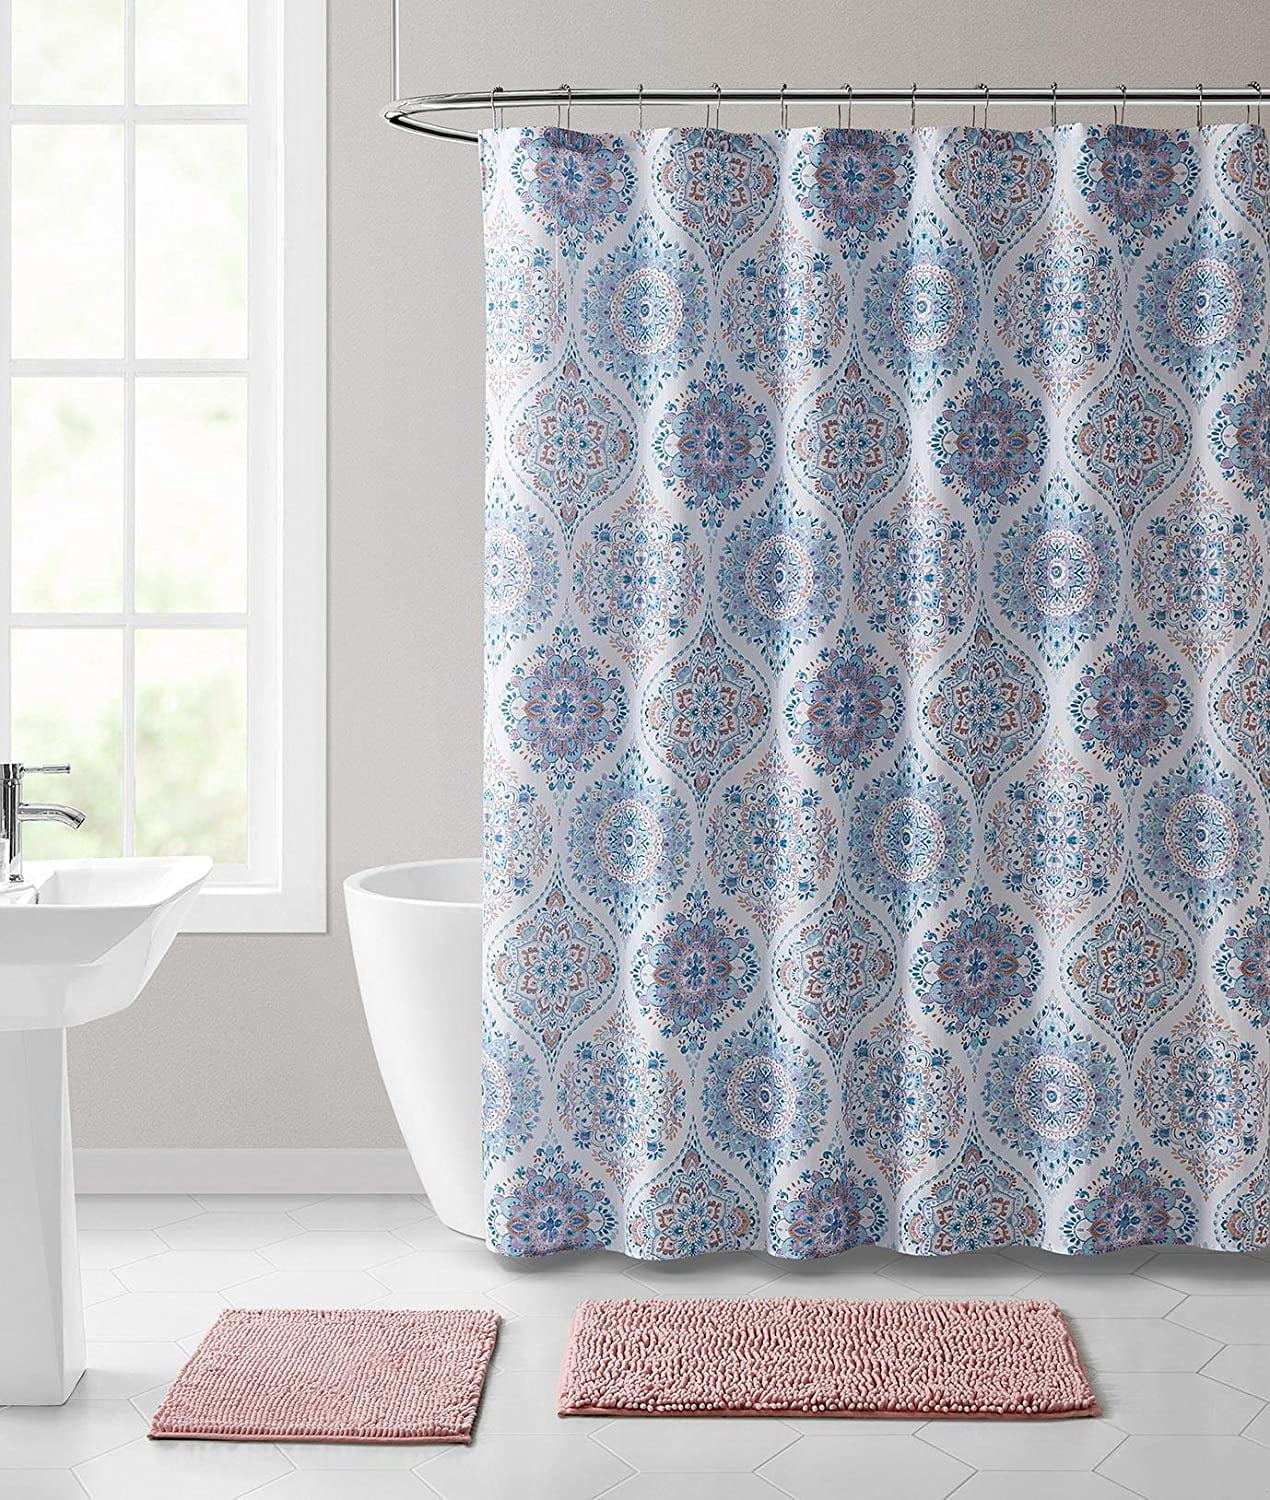 Floral Paisley Artistic Design Teal White VCNY Decorative Fabric Shower Curtain 